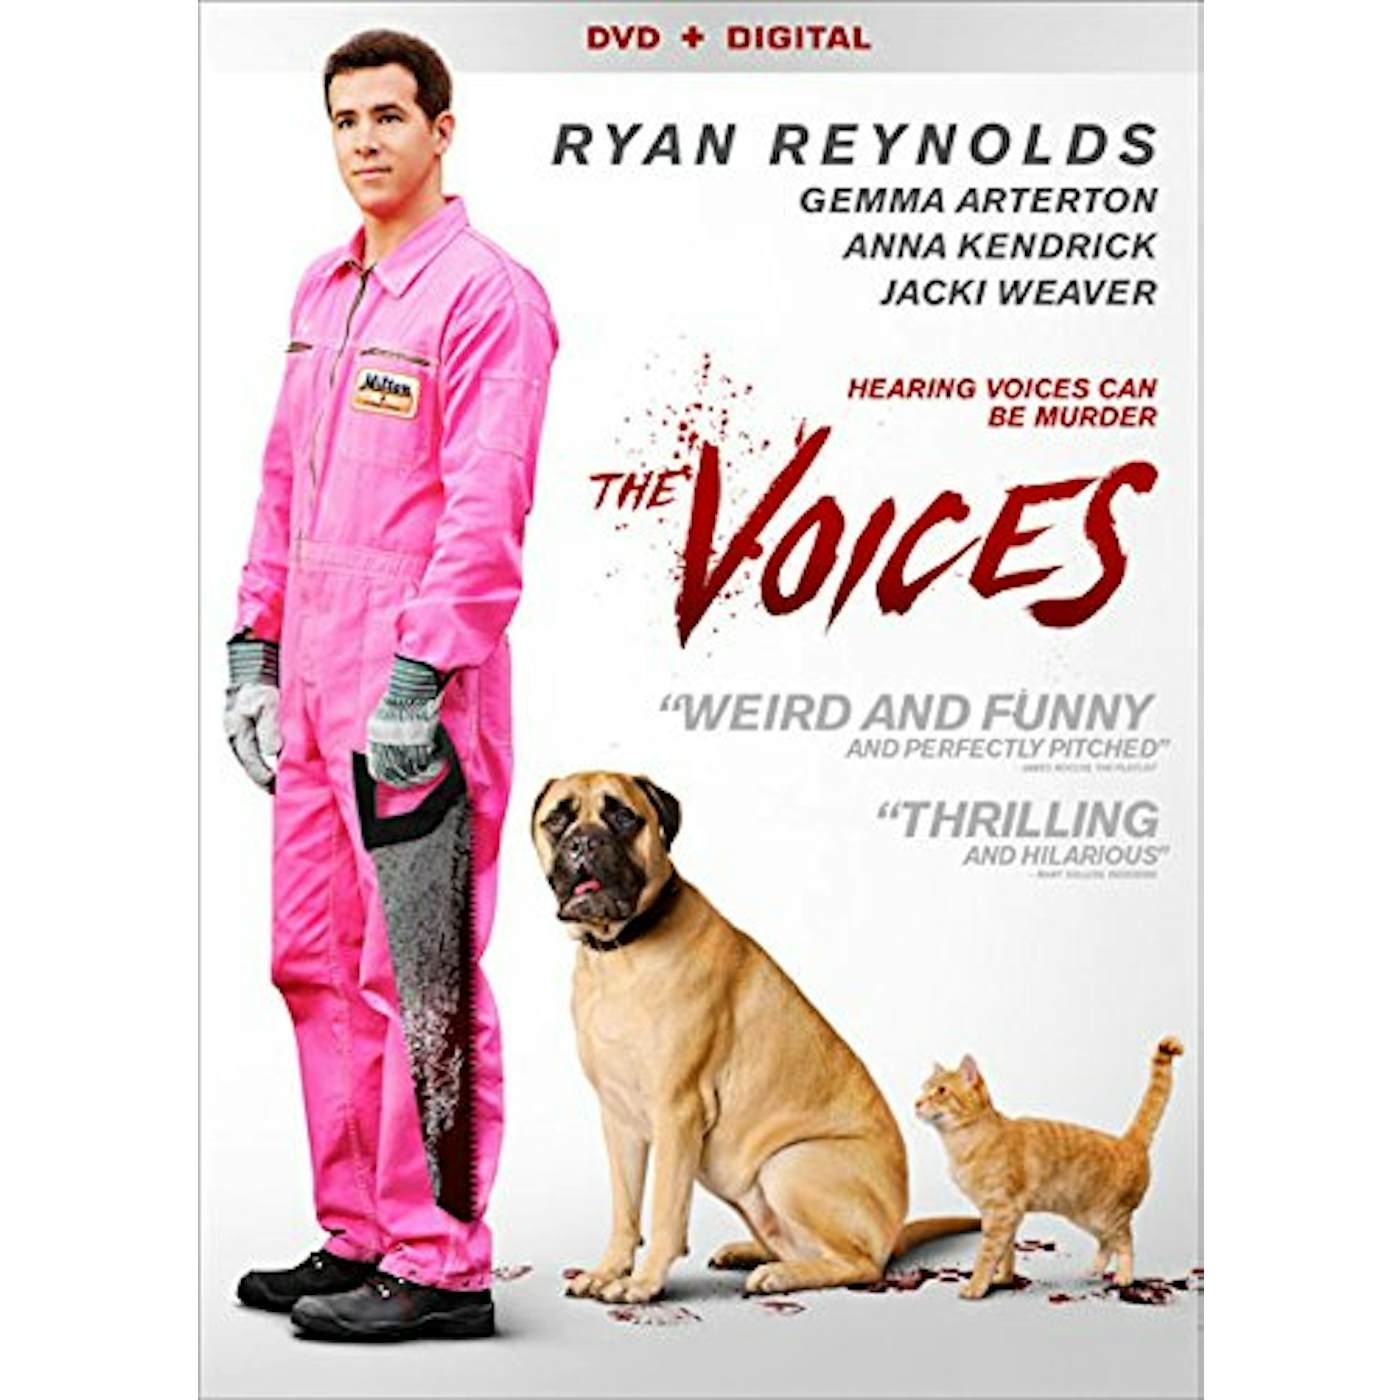 The Voices DVD